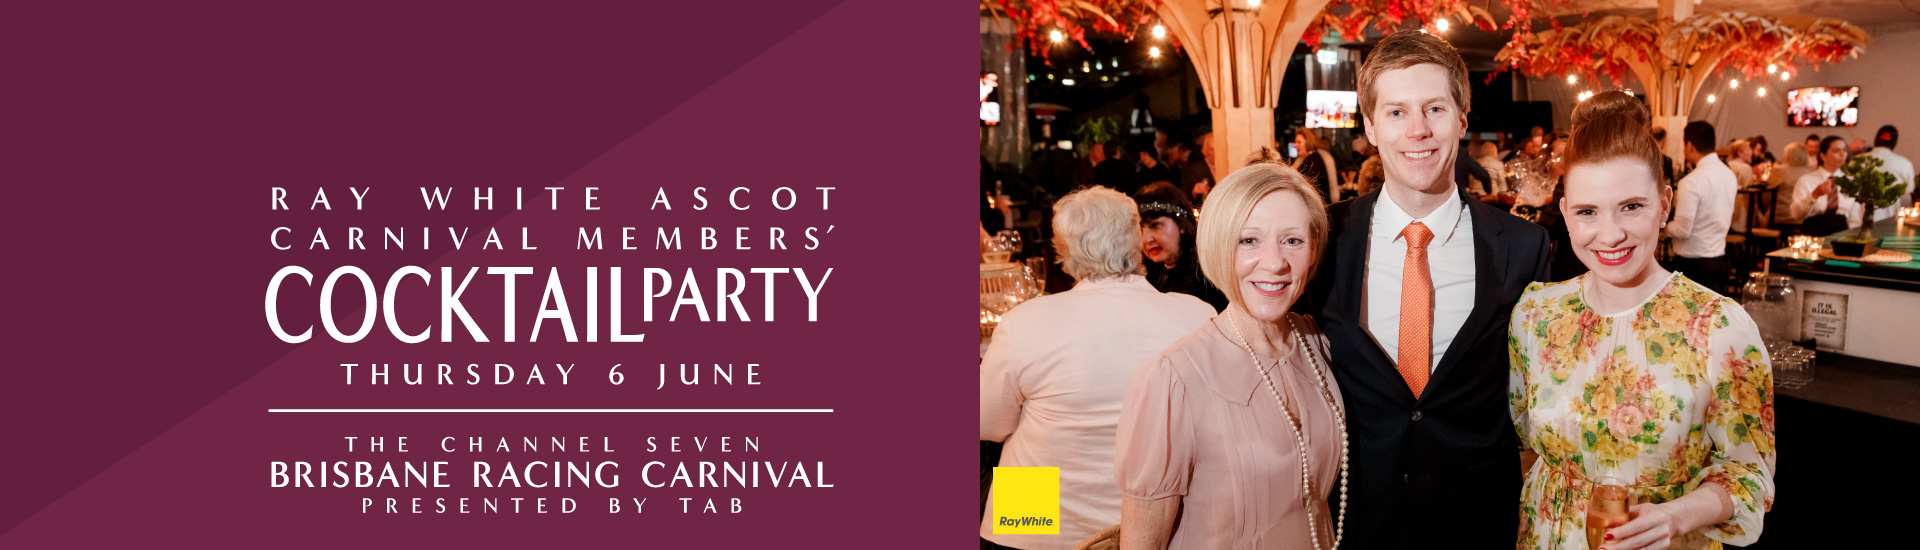 Channel Seven Brisbane Racing Carnival Members Cocktail Party Banner